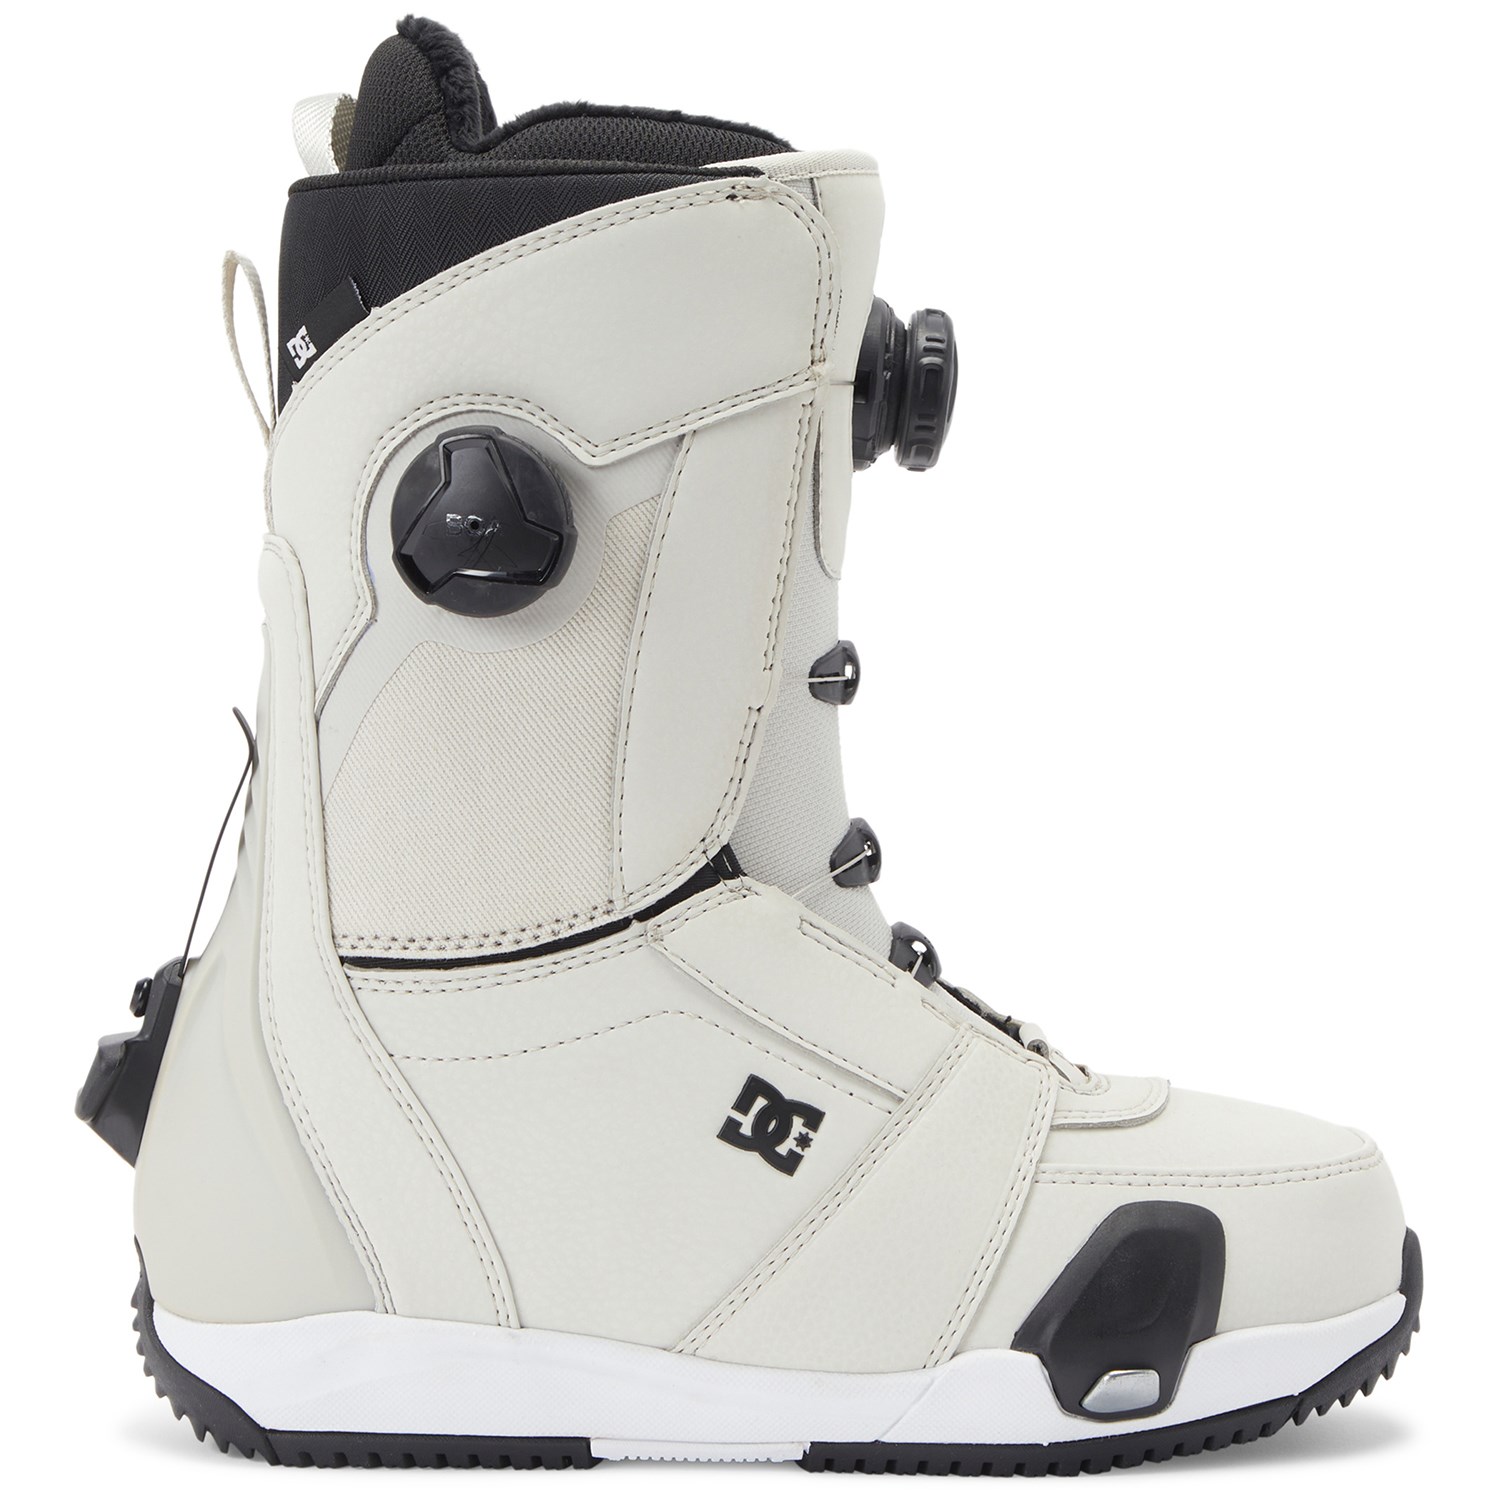 DC Lotus Step On Snowboard Boots - Women's | evo Canada